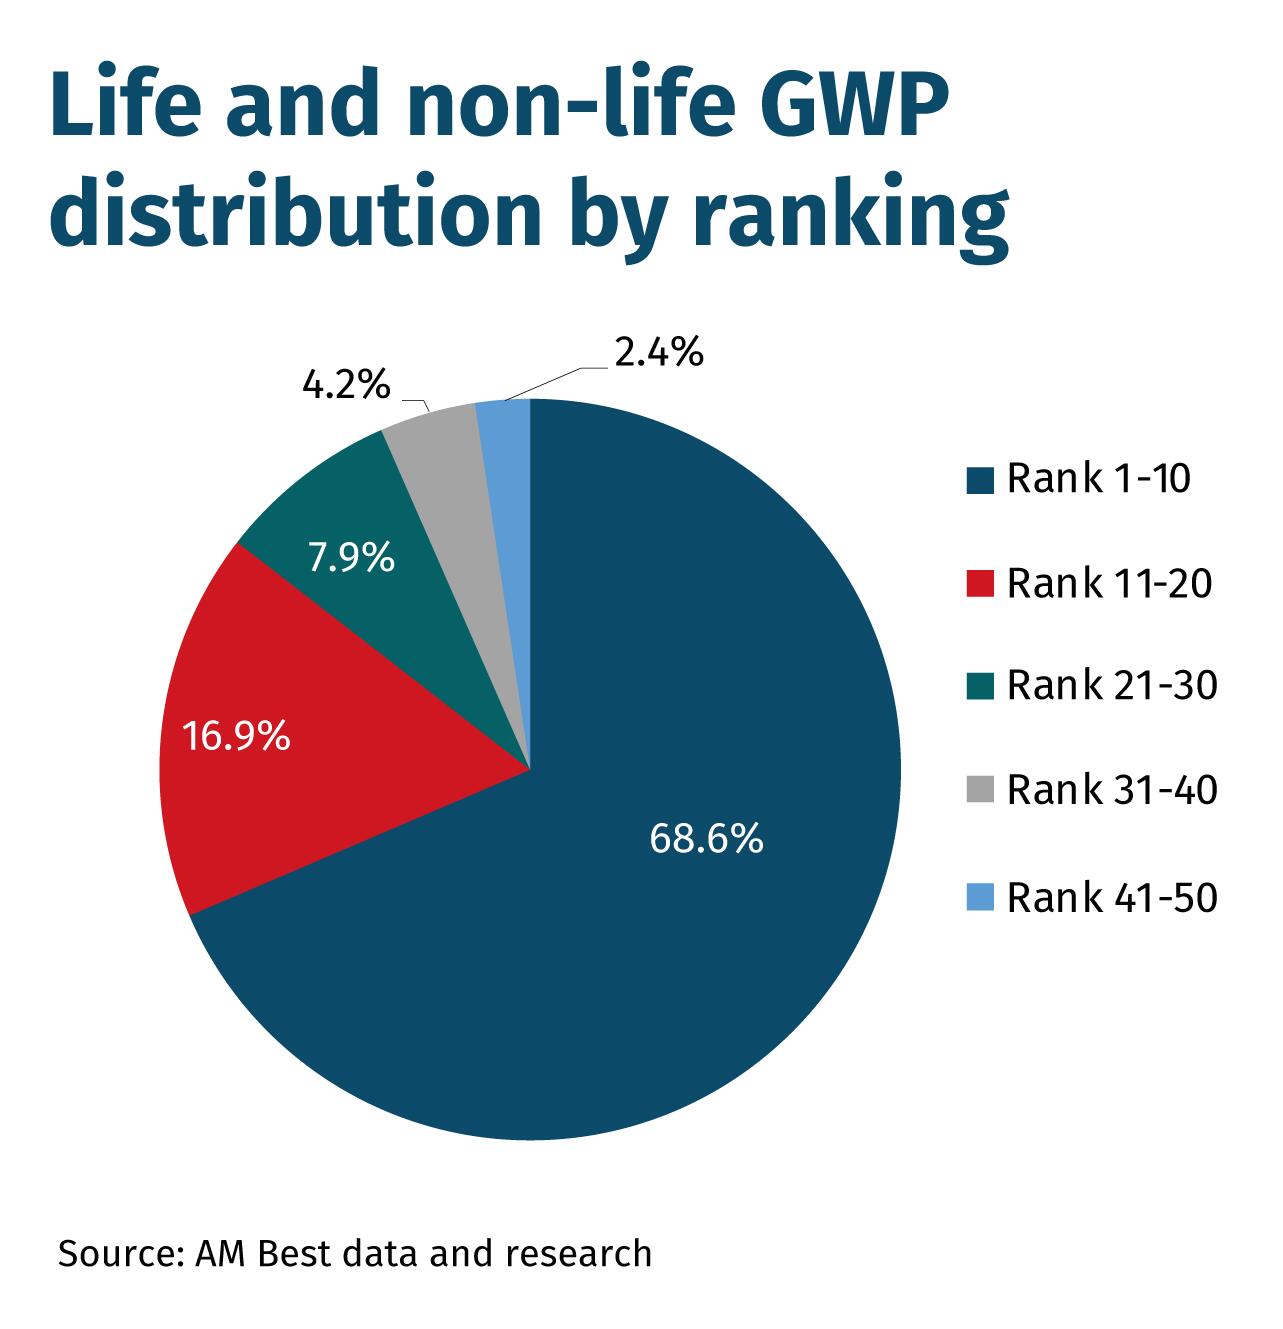 Life and non-life GWP distribution by ranking